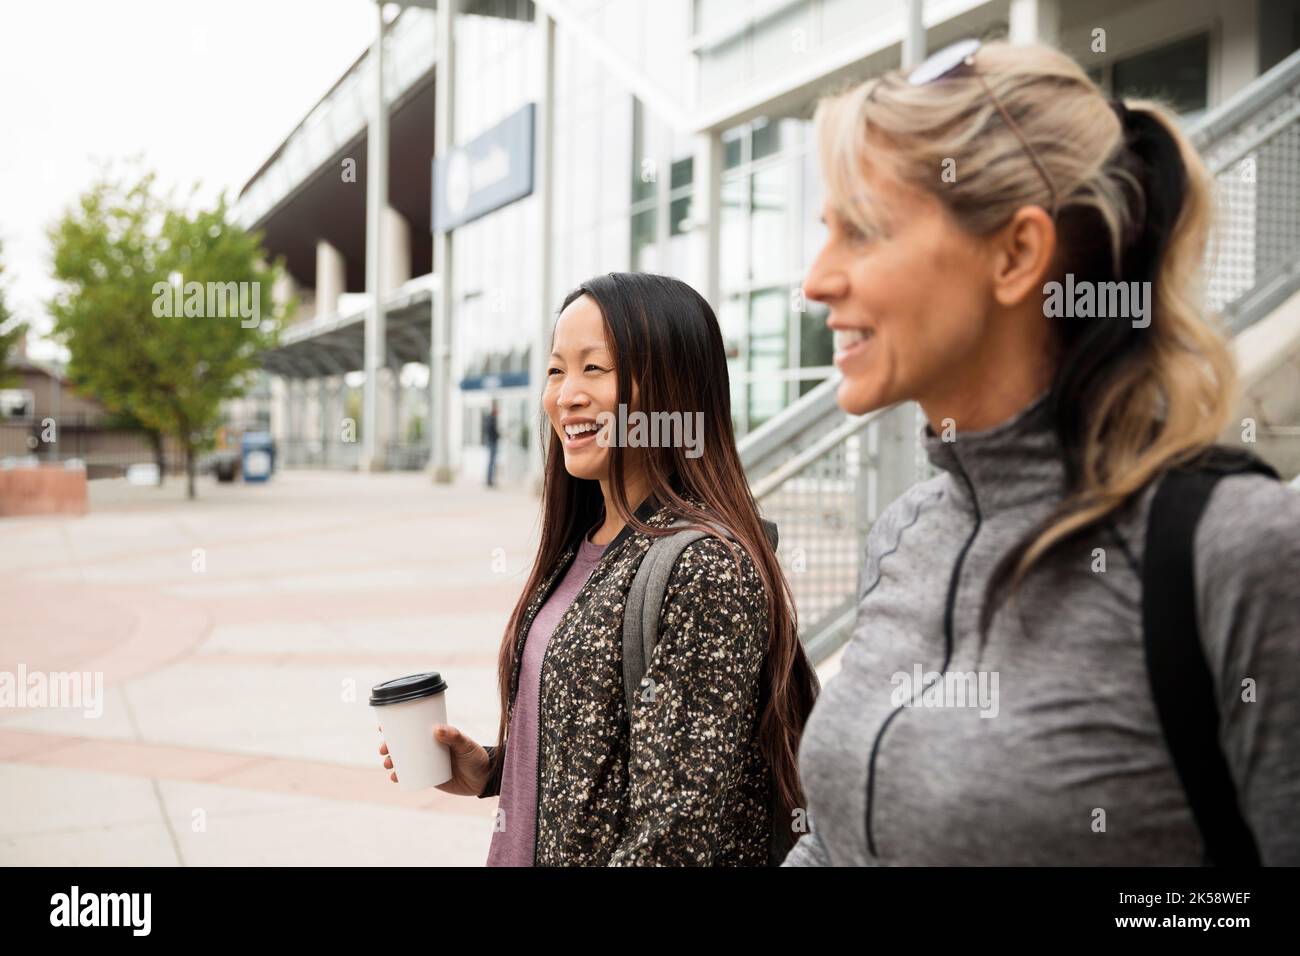 Two women on the move, smiling and talking outside building Stock Photo